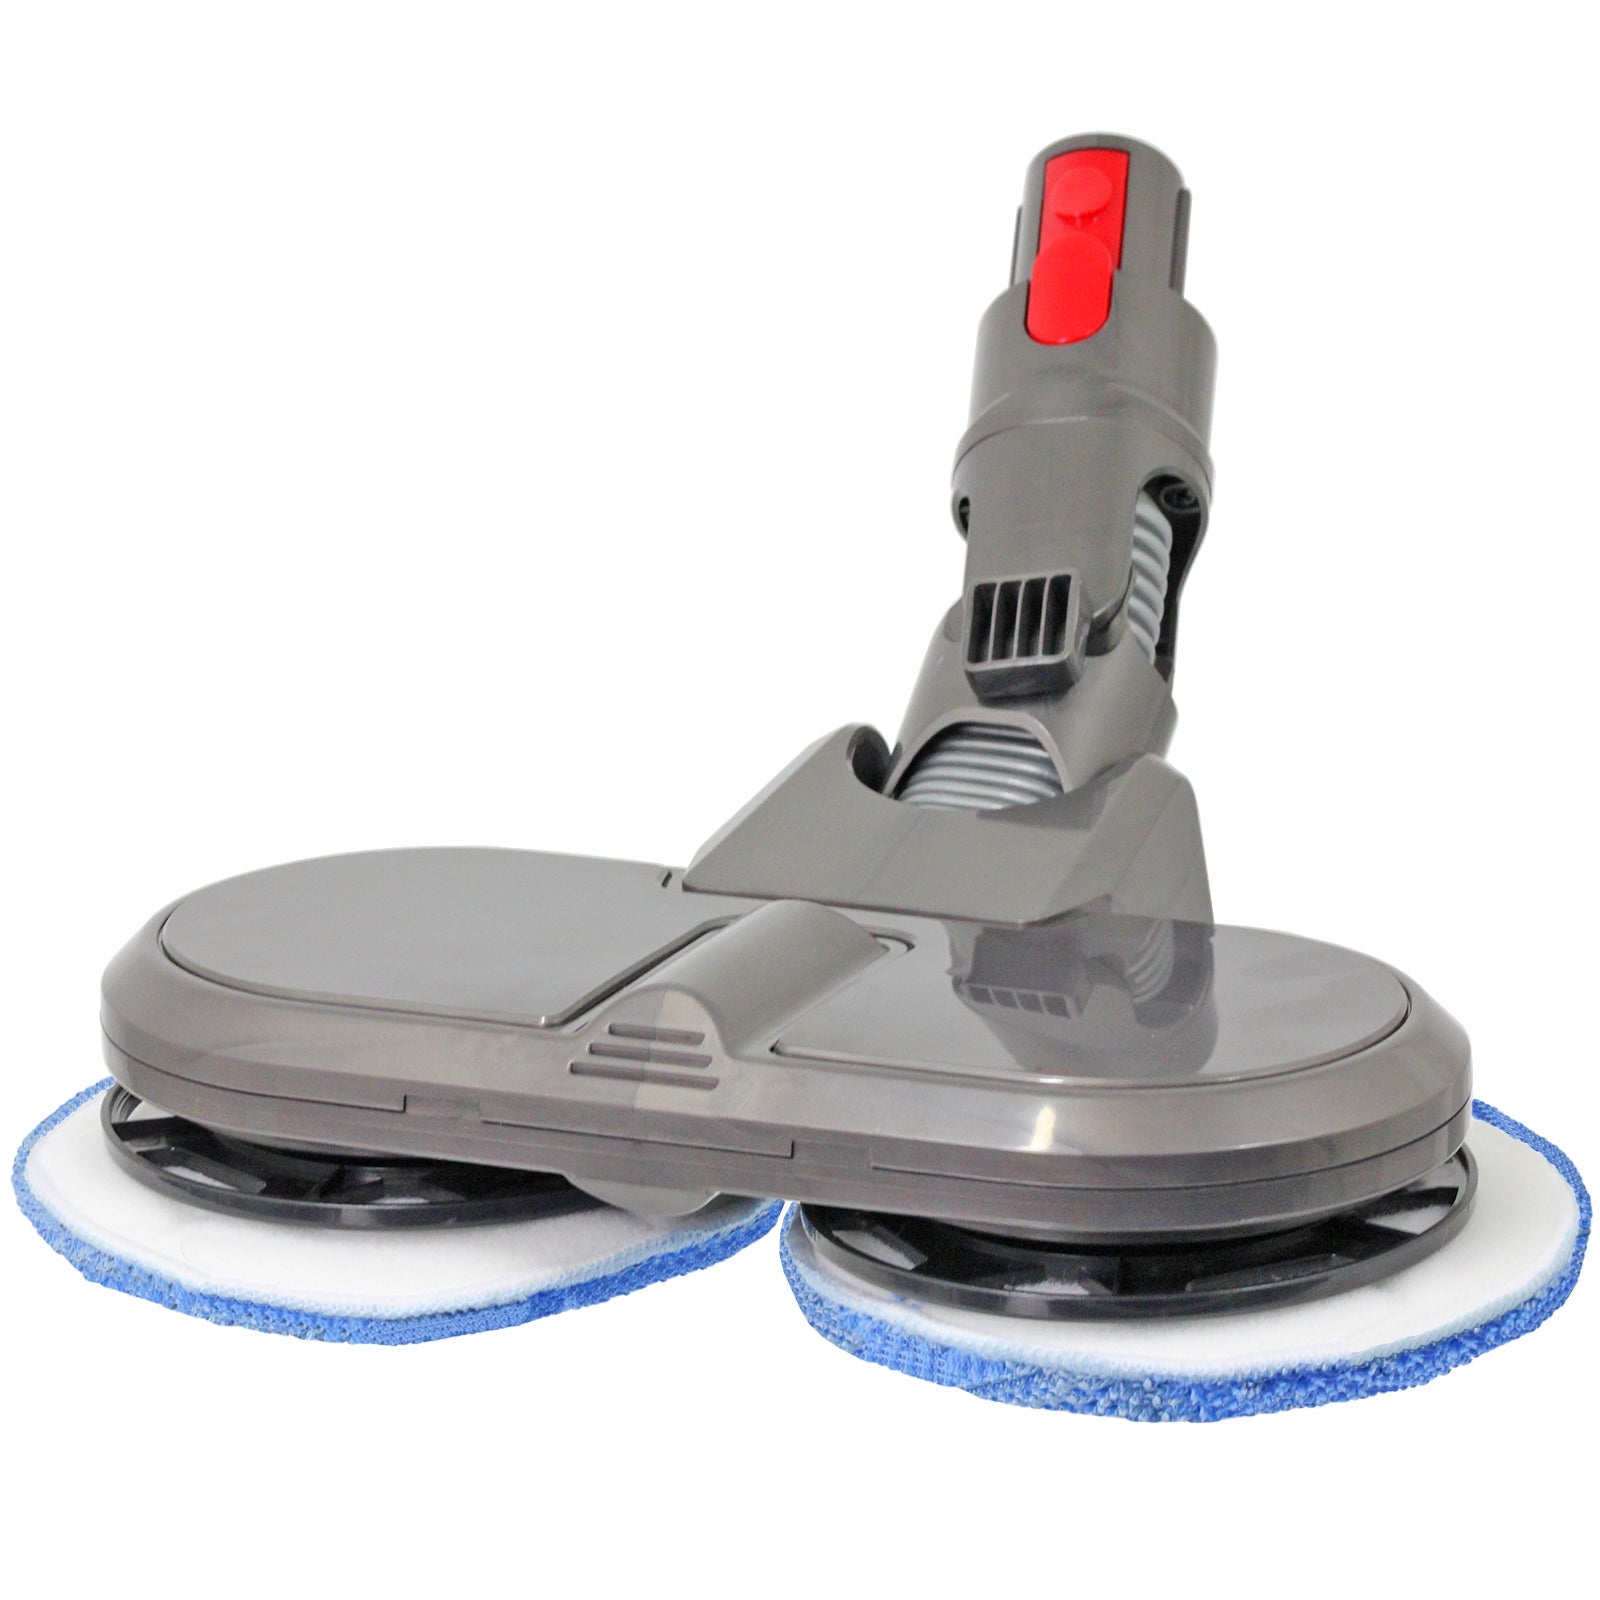 Hard Floor Surface Polisher Scrubbing Cleaning Mop Tool for Dyson V8 SV10 Vacuum Cleaner